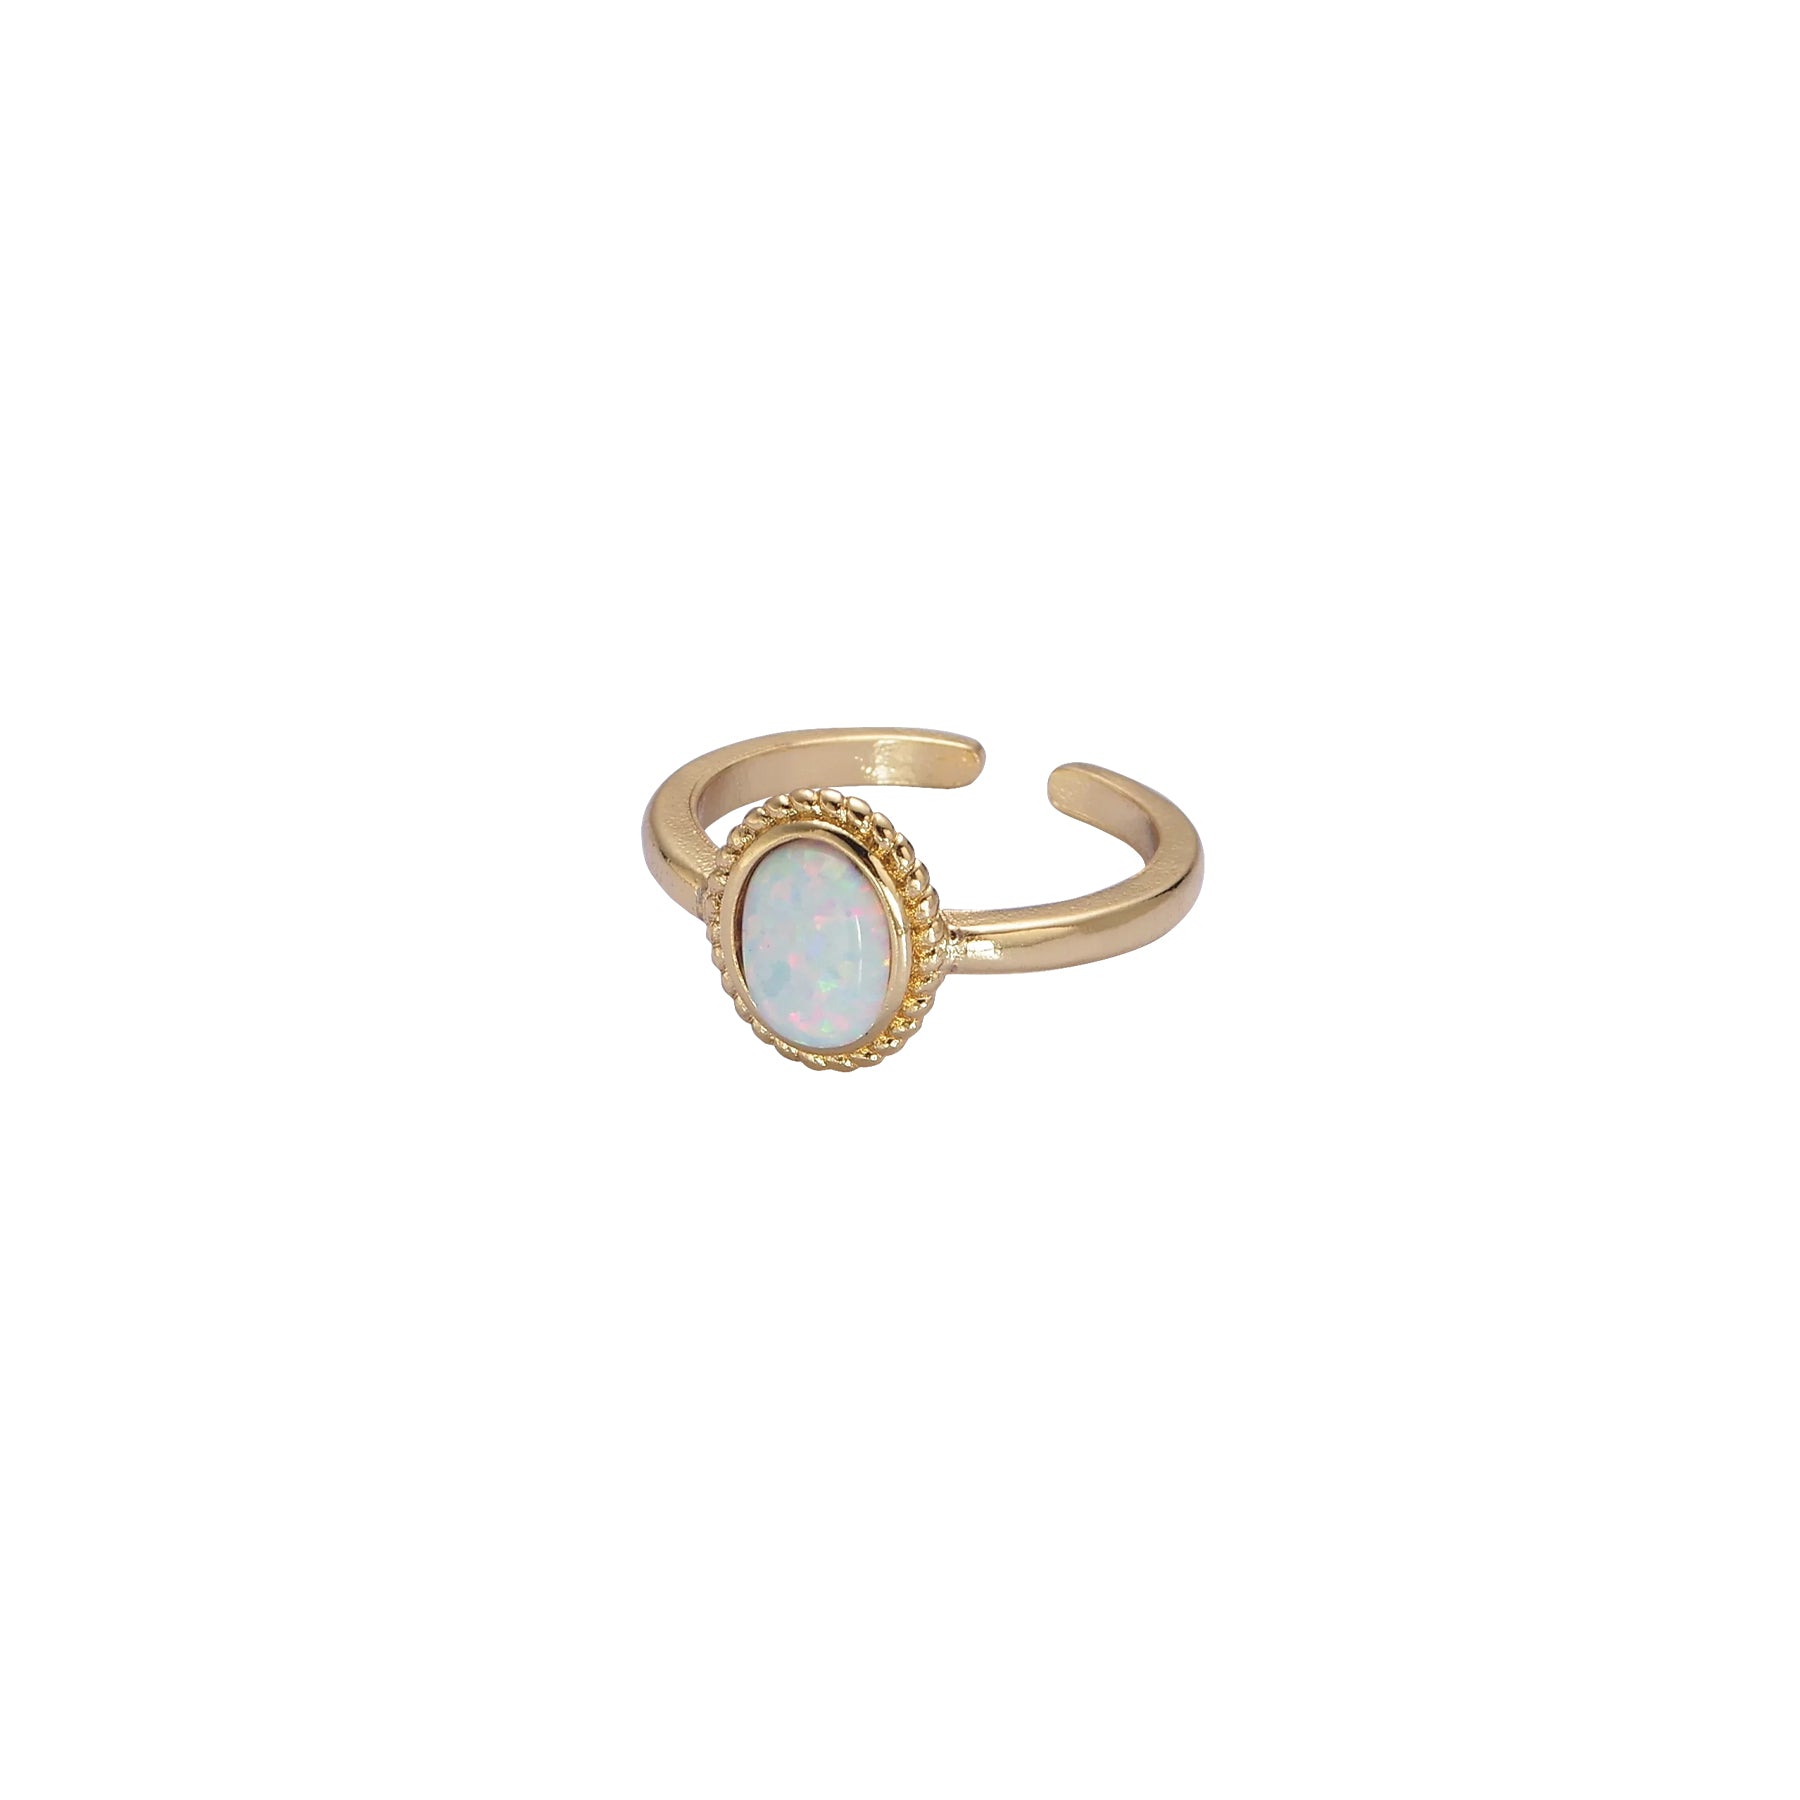 Gold and white opal ring